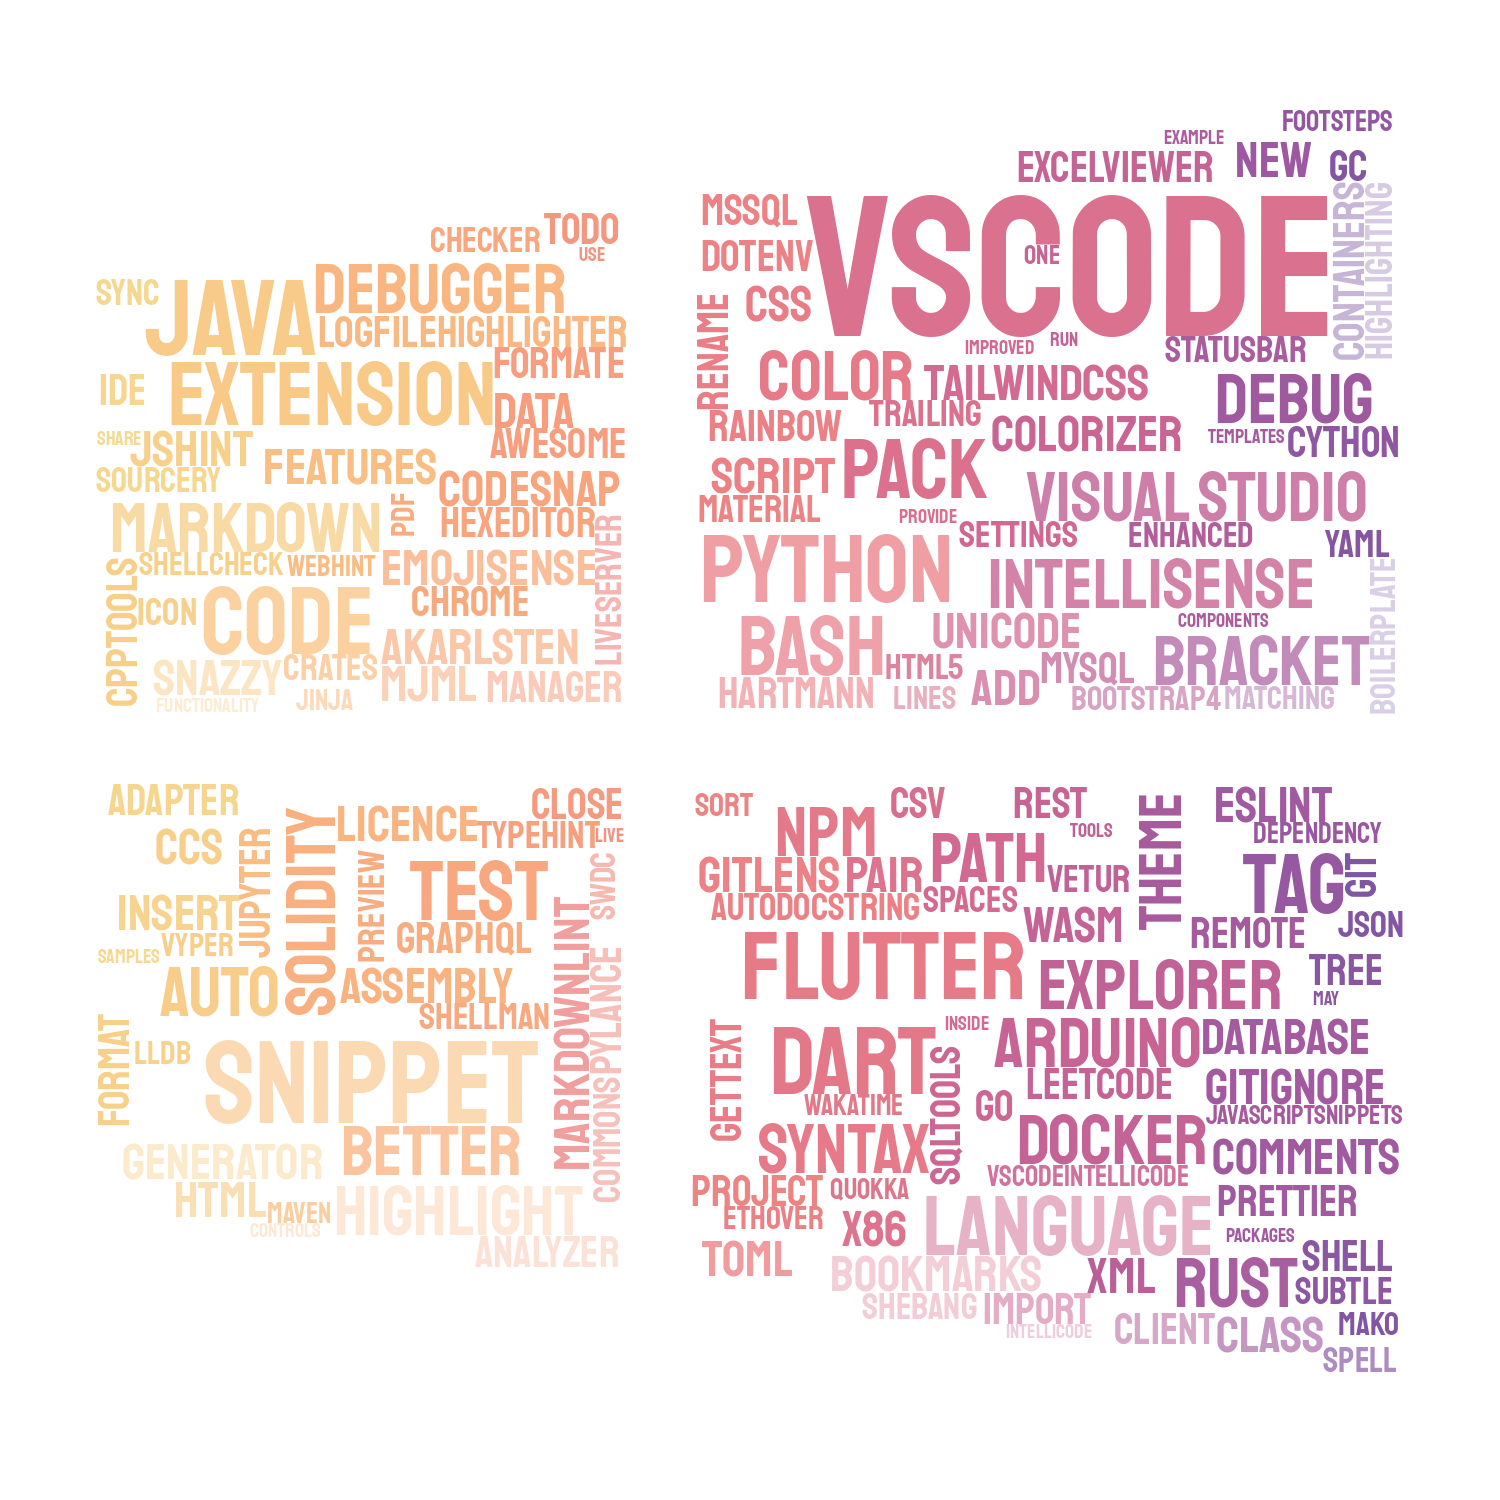 117-extensions-vs-code-stylecloud